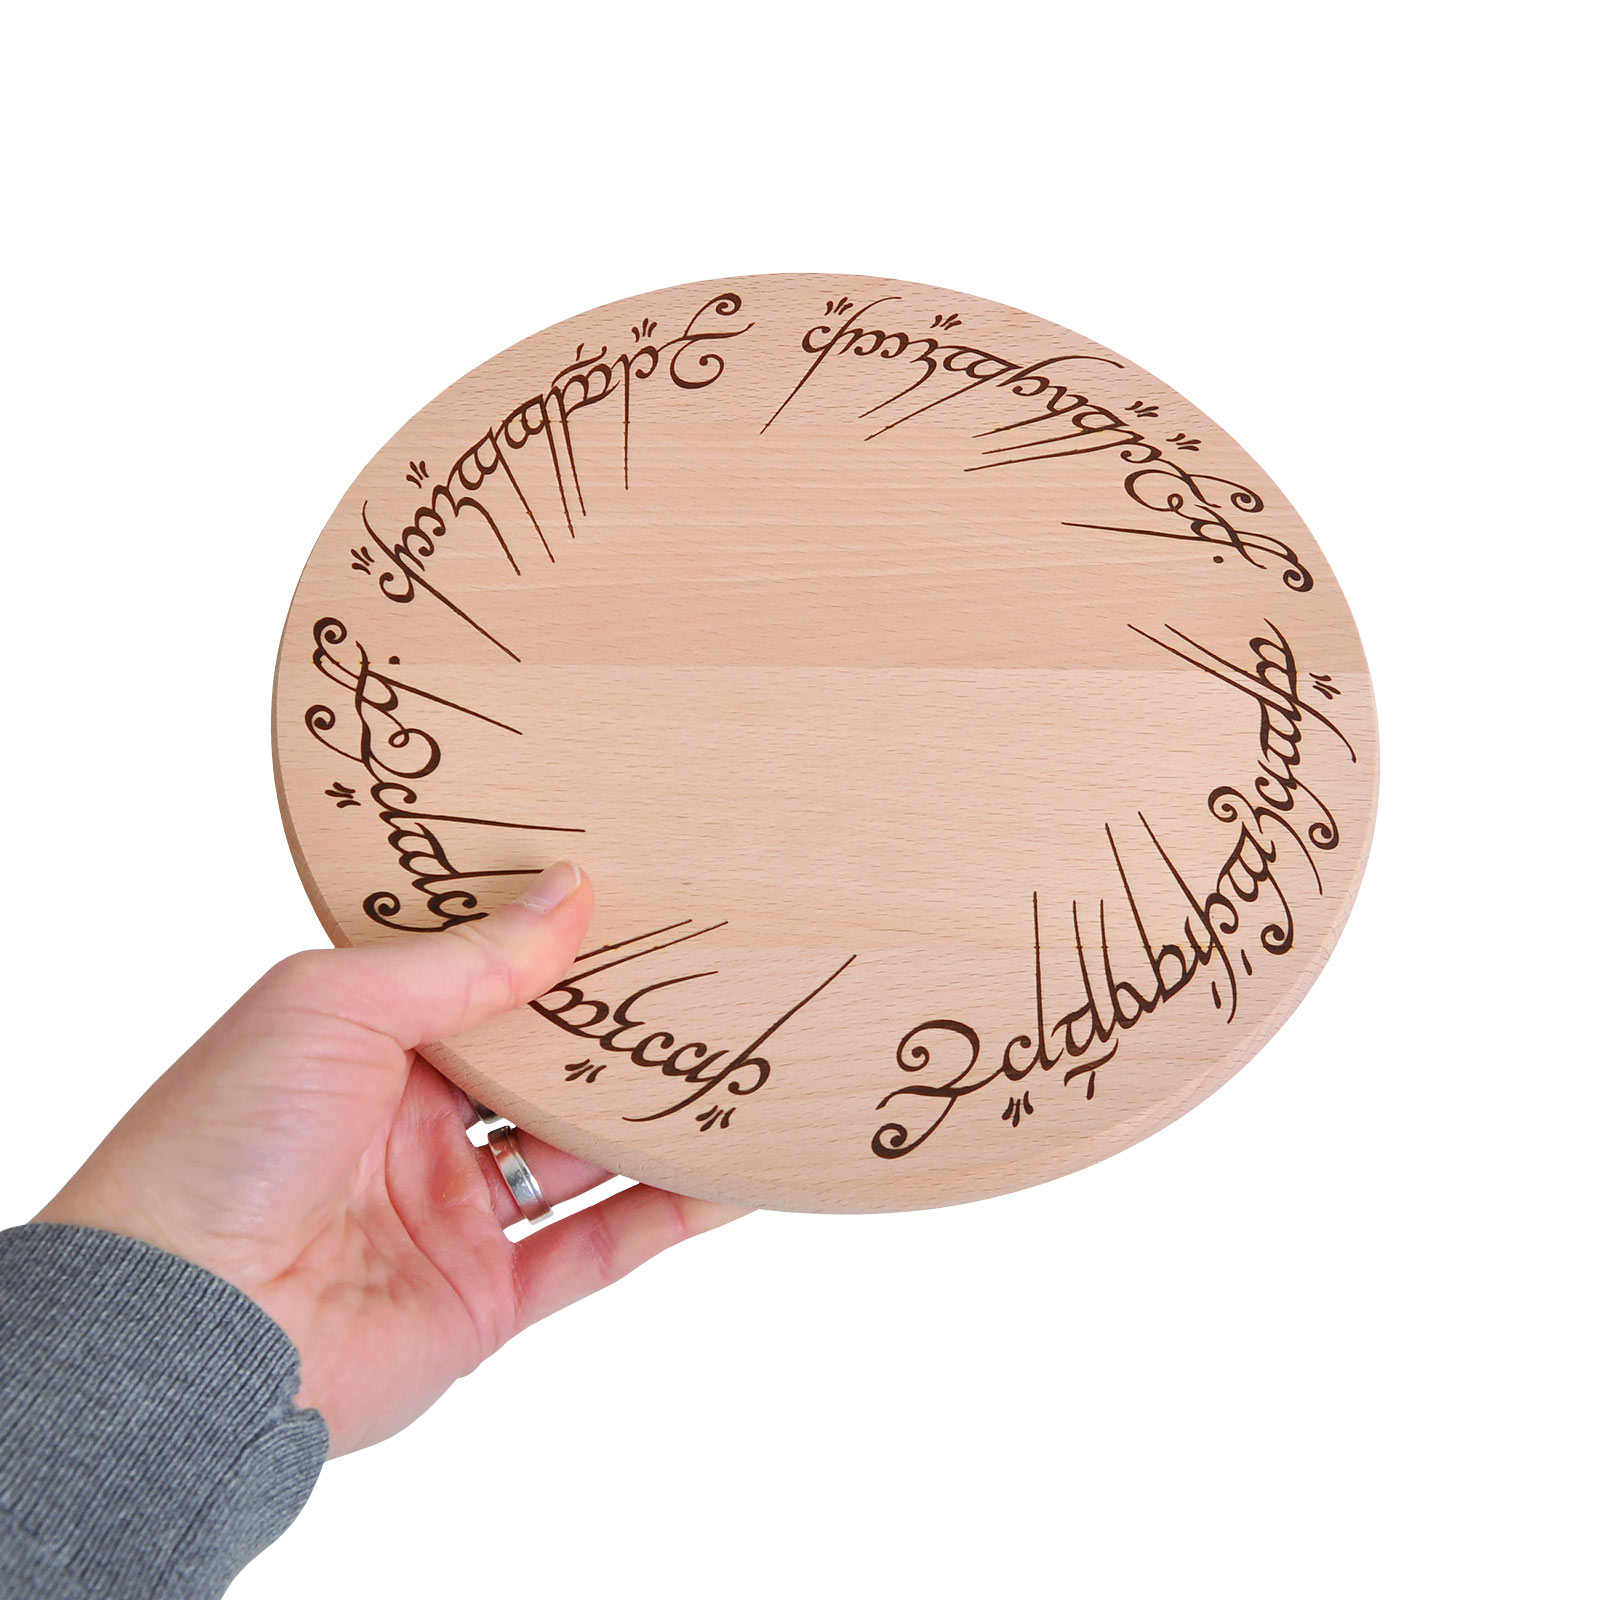 Lord of the Rings - The One Ring cutting board beech